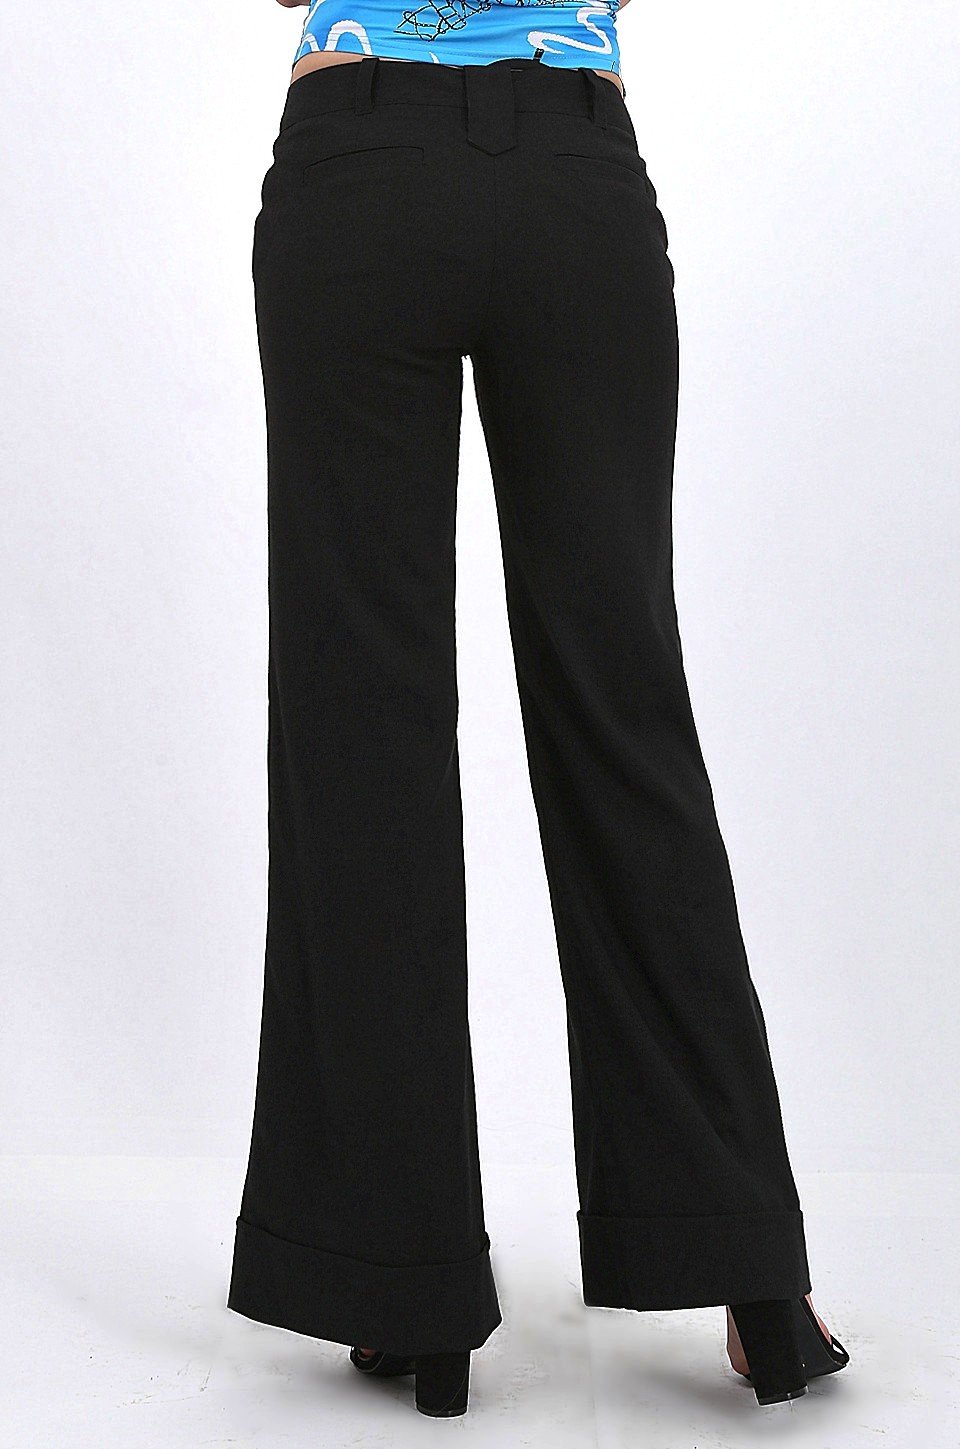 MISS PINKI Millie tailored cuffed work pants in Black